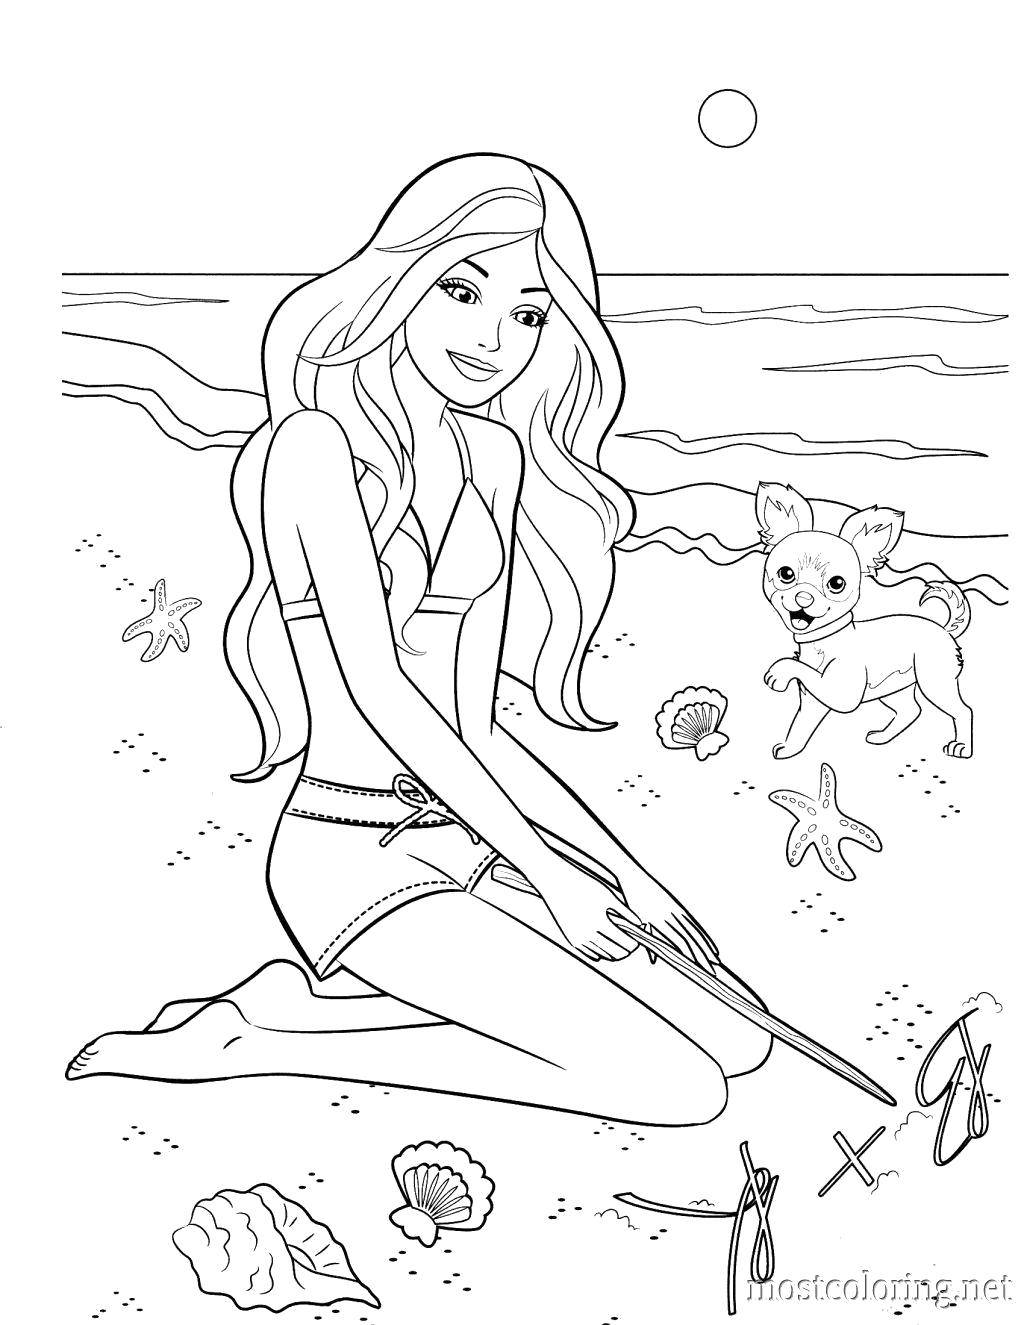 Coloring Barbie on the beach. Category Barbie . Tags:  Barbie , beach, summer, holiday.